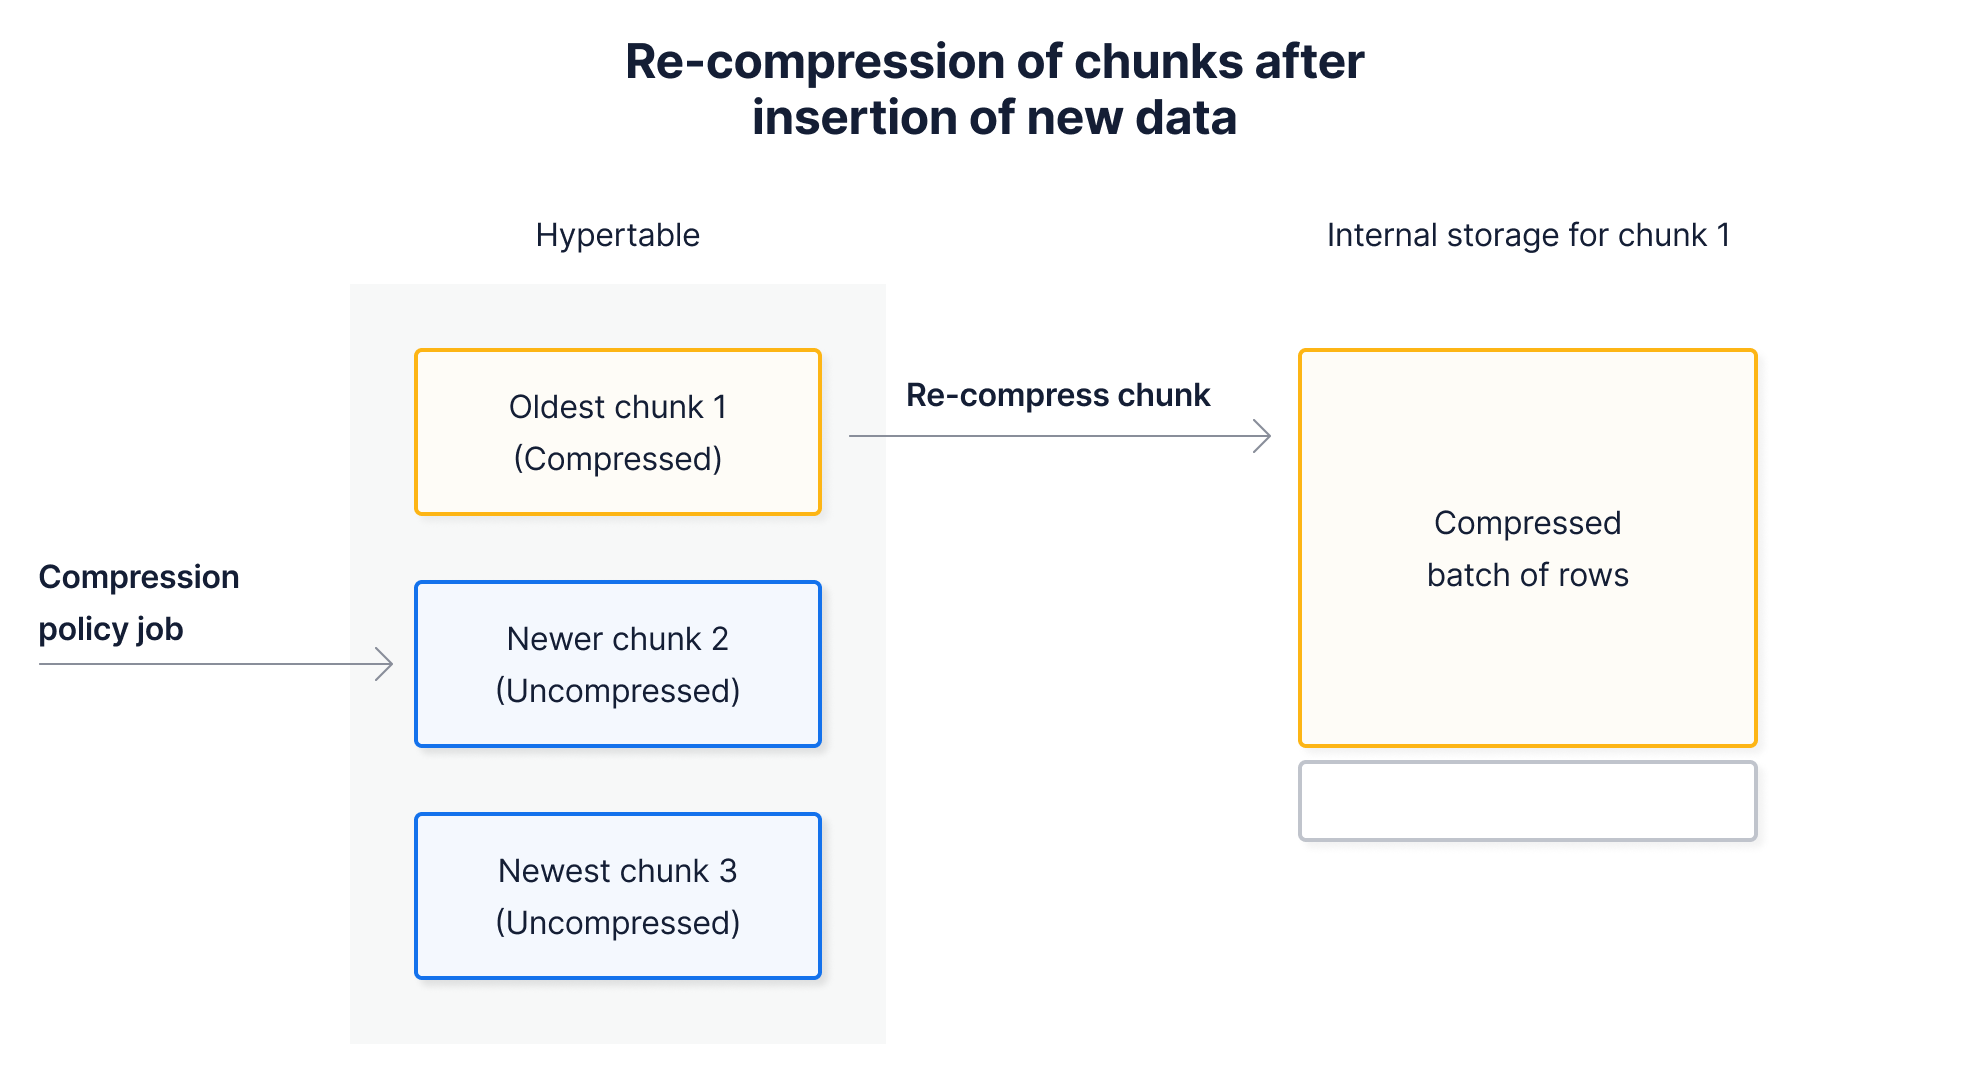 Architecture diagram illustrating how TimescaleDB handles re-compression of chunks after new data has been inserted into hypertables with compressed chunks